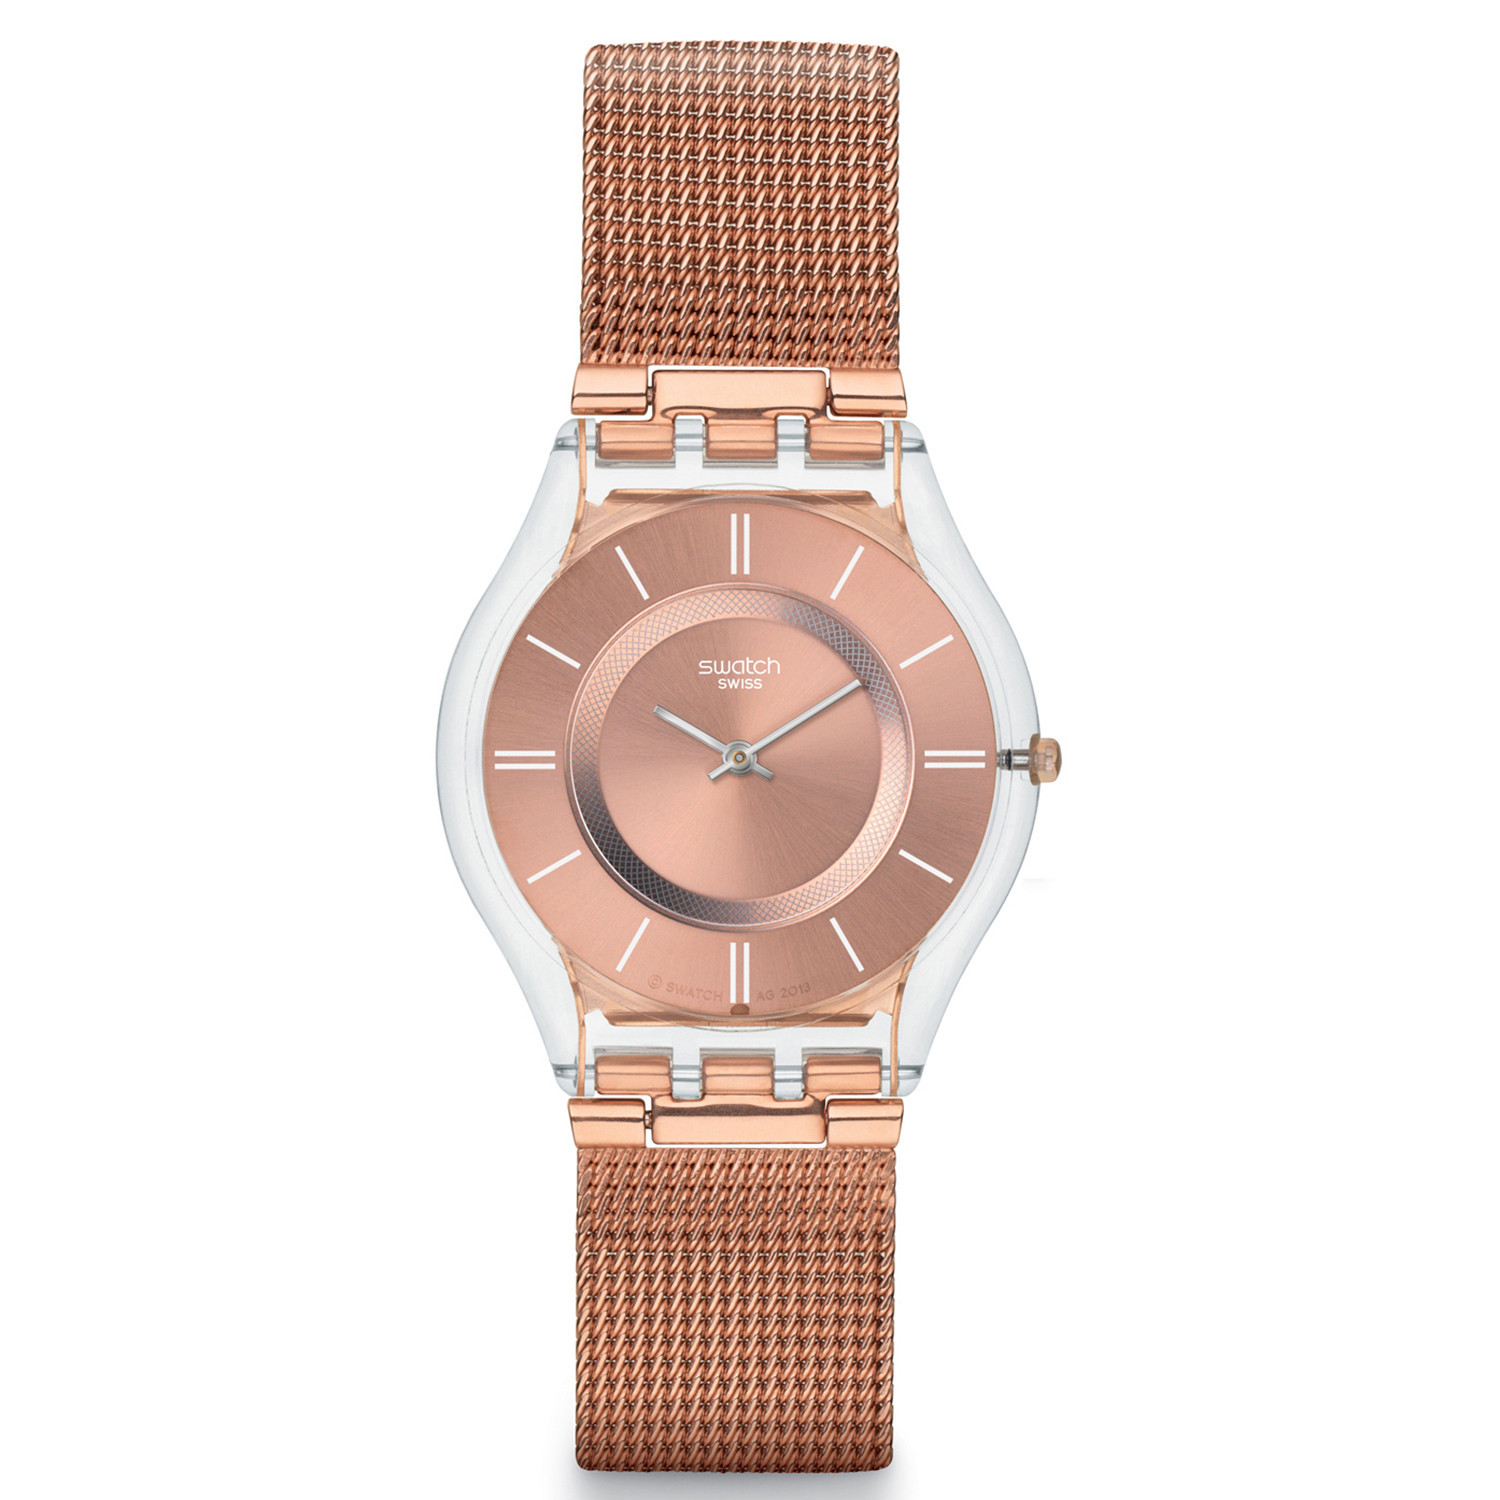 Montre femme Swatch Skin Hello Darling
Collection Classic